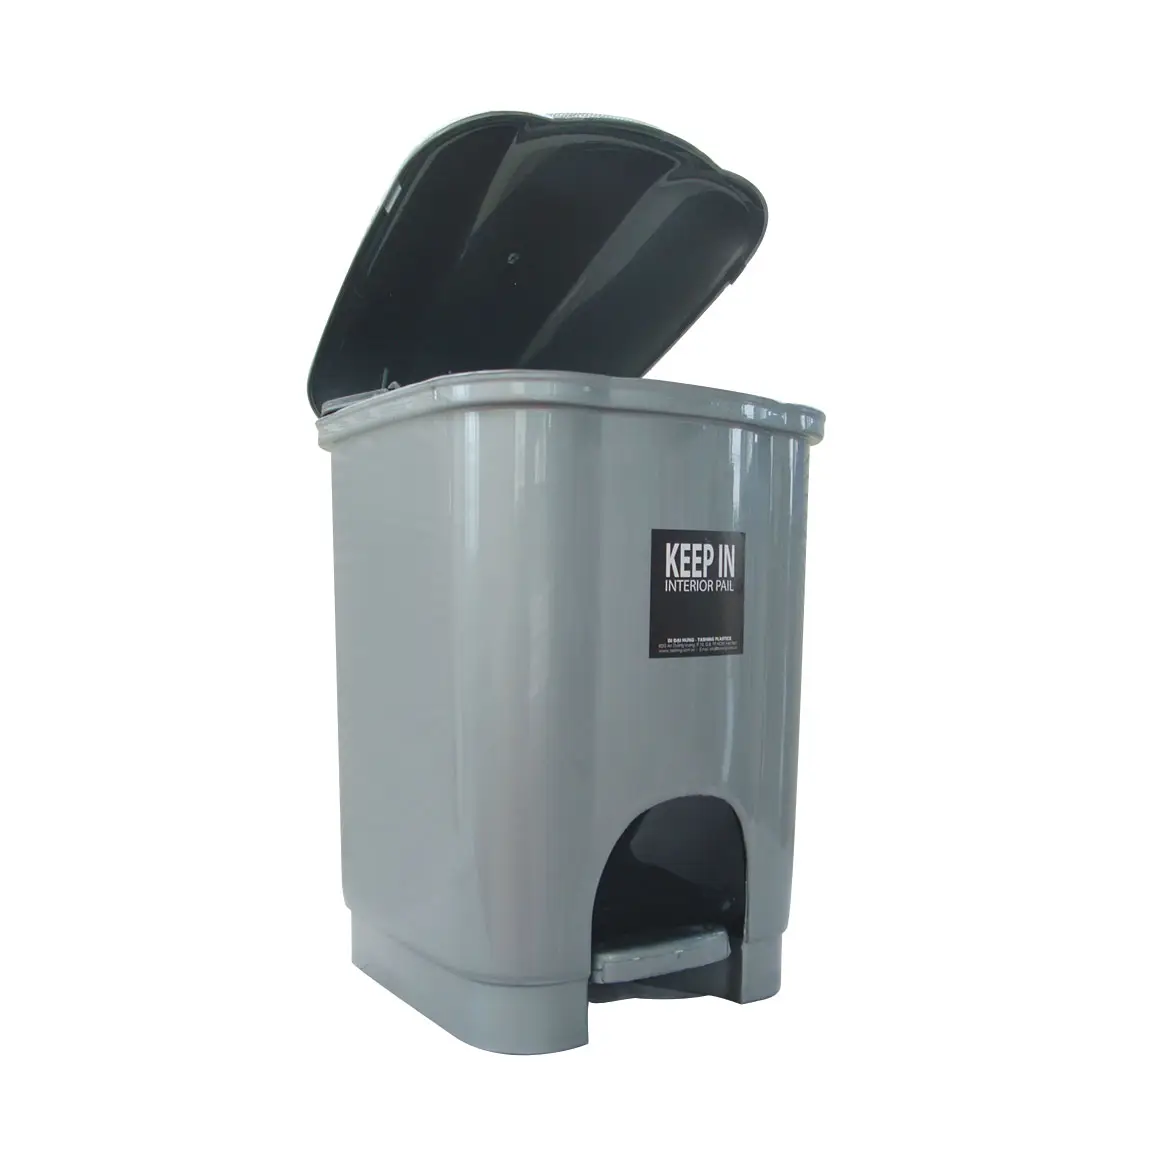 Wholesale Good Quality Household Recycling Trash Can Recycle Bins Plastic Trash Bin from Vietnam Best Supplier